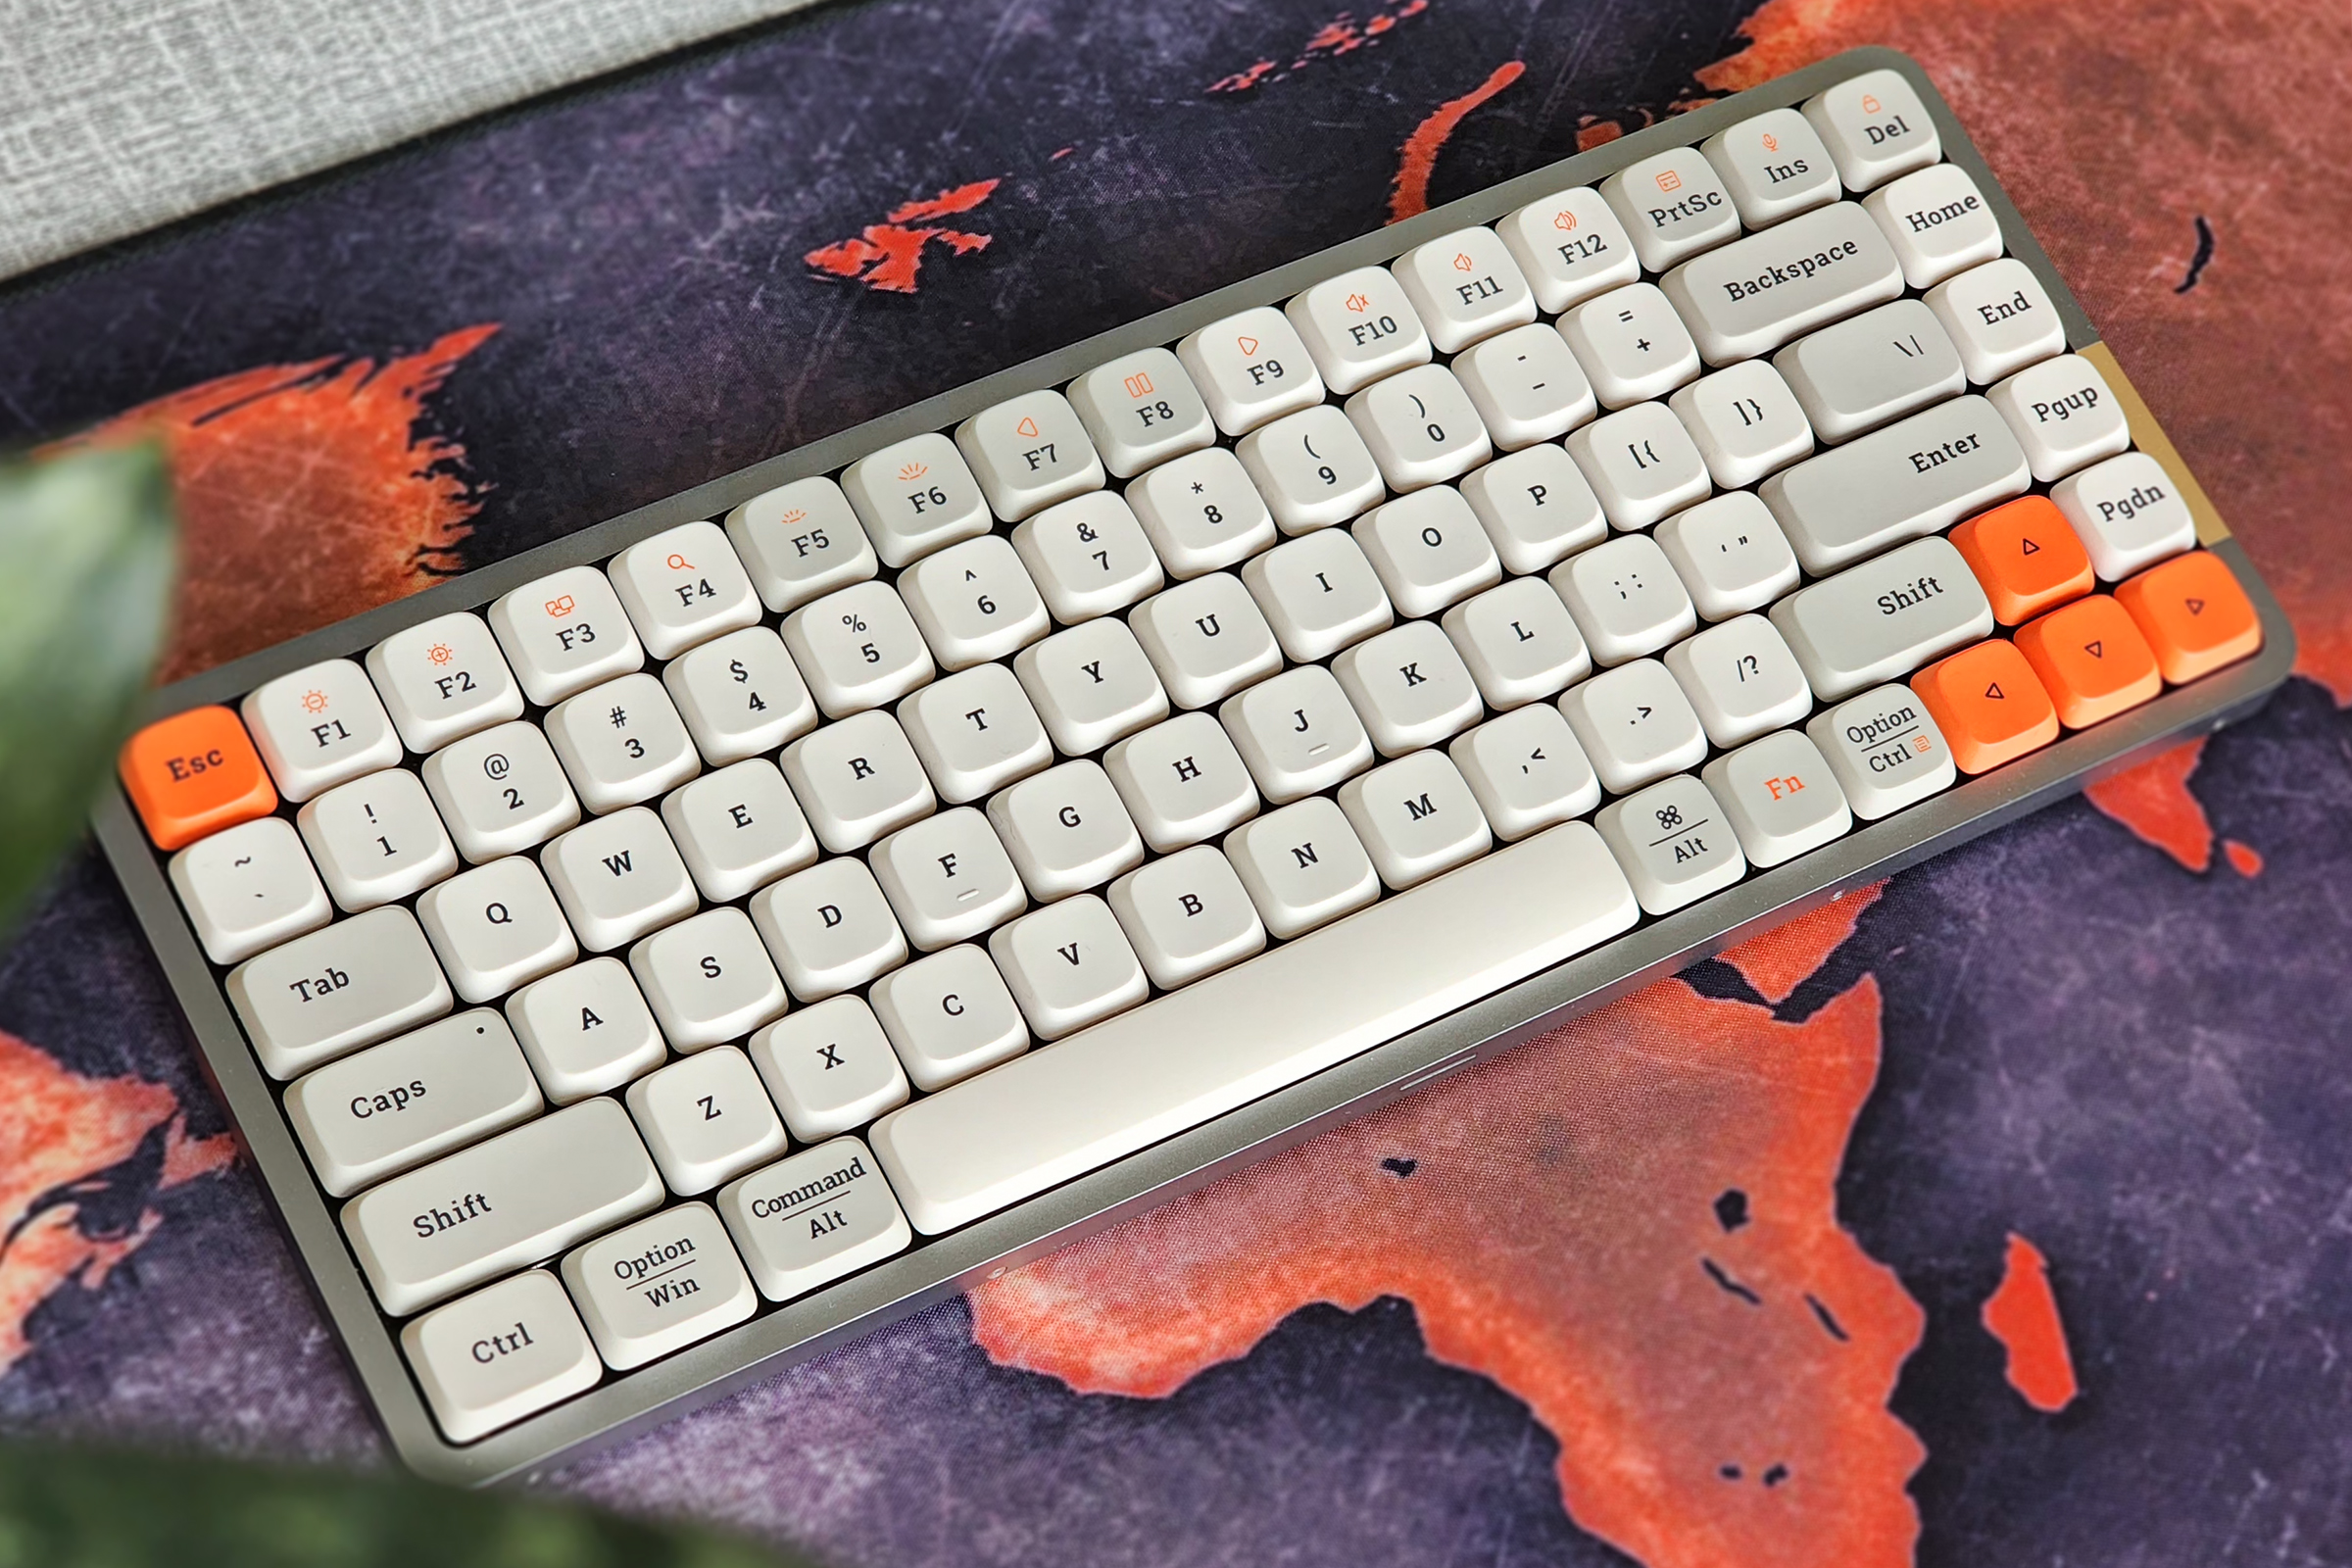 Lofree Flow low profile mechanical keyboard with Kailh switches and white retro styles dye-sub pbt keycaps on a desk.